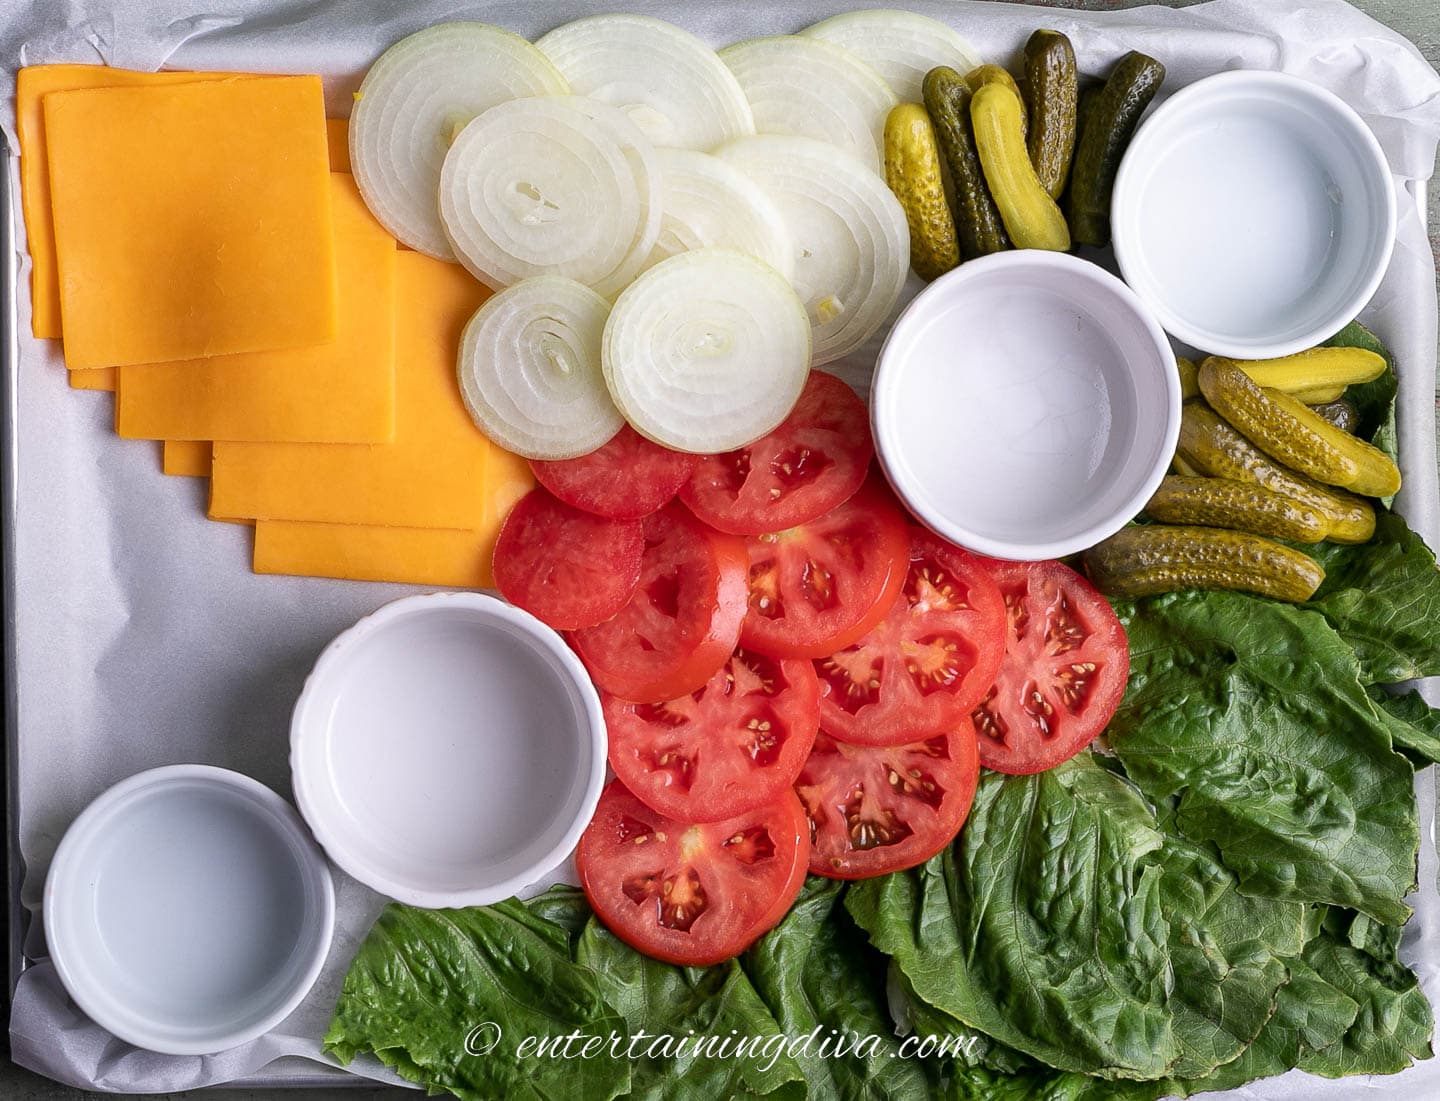 how to make a burger toppings board step 6: bowls, lettuce, cheese, tomatoes, onions, and dill pickles